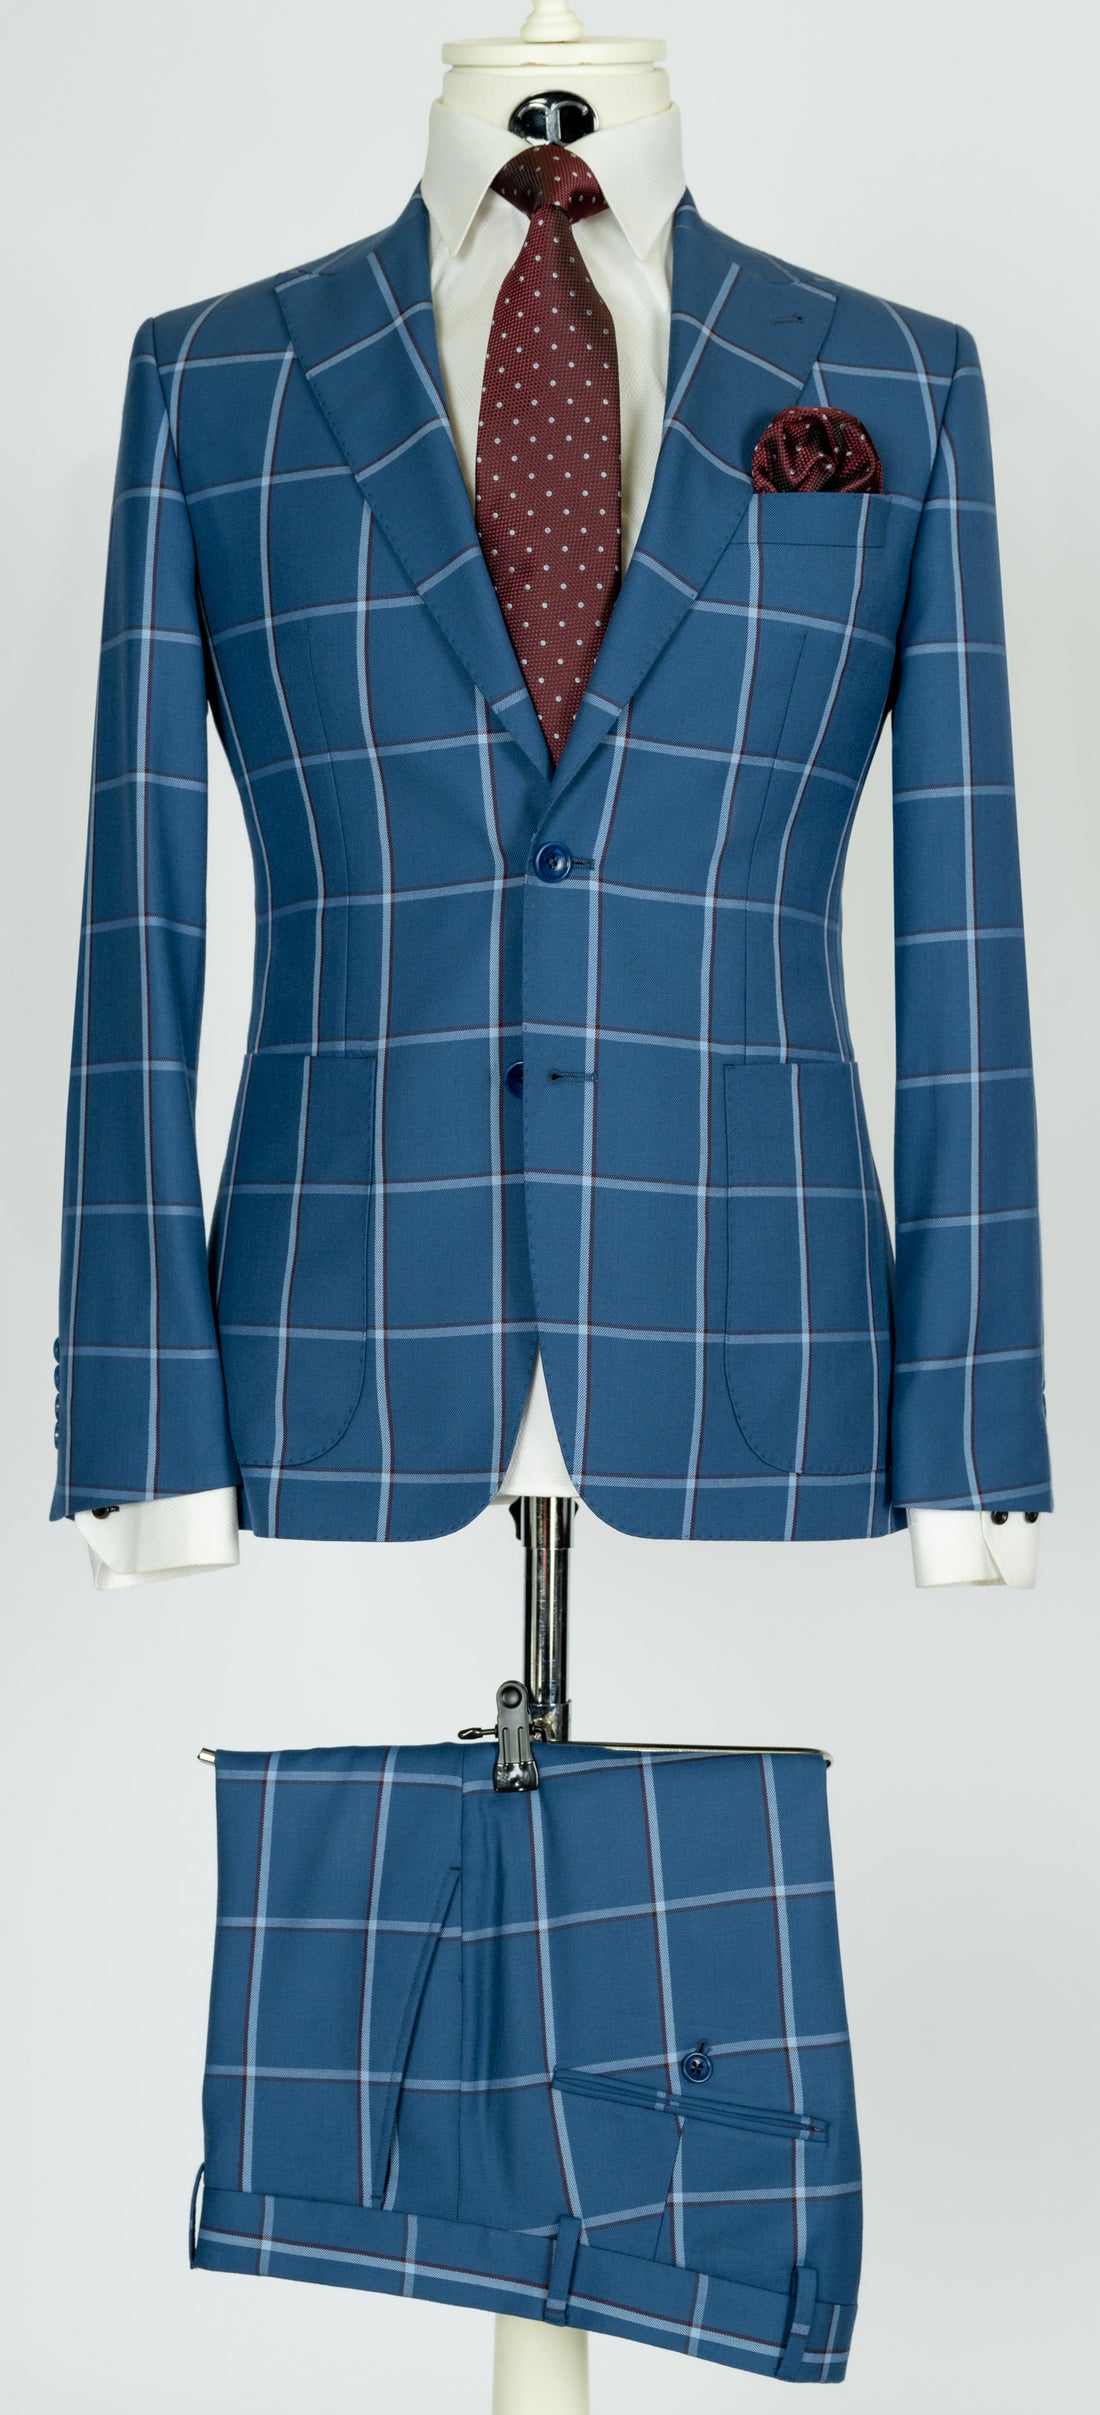 Tollegno - Blue windowpane 2-piece slim fit suit with patch pockets